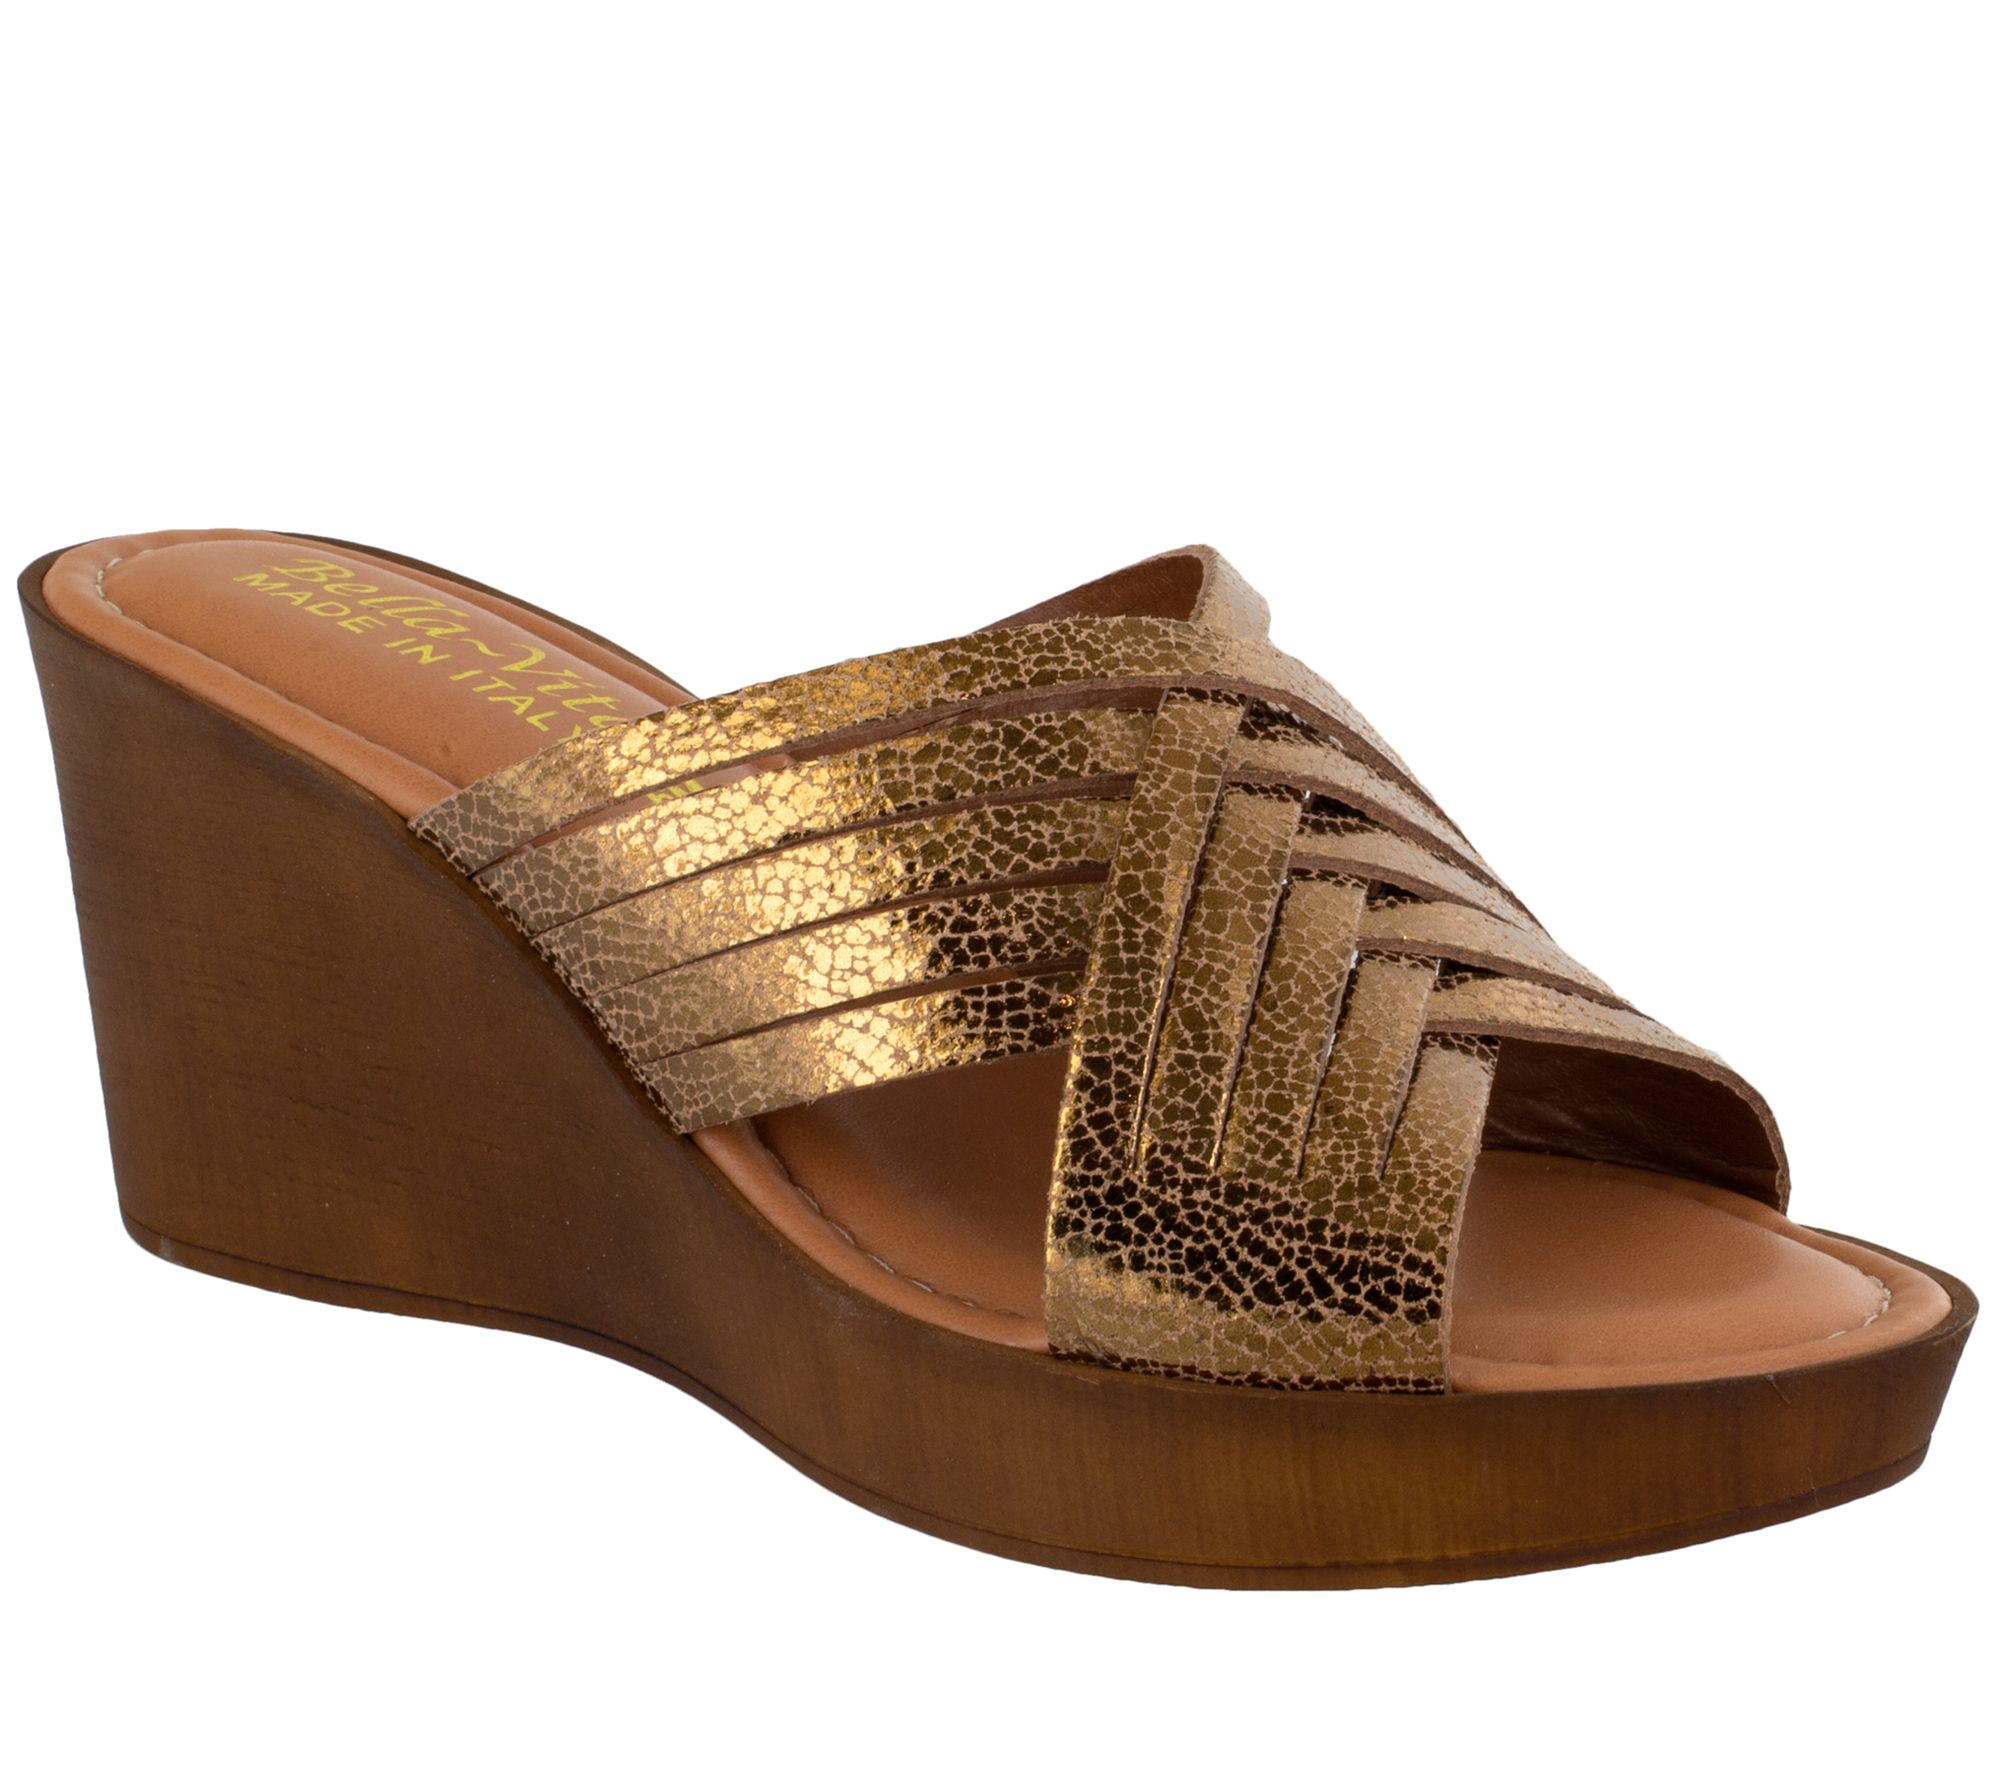 Bella Vita Italy Woven Leather Wedge Sandals - Cat-Italy - QVC.com